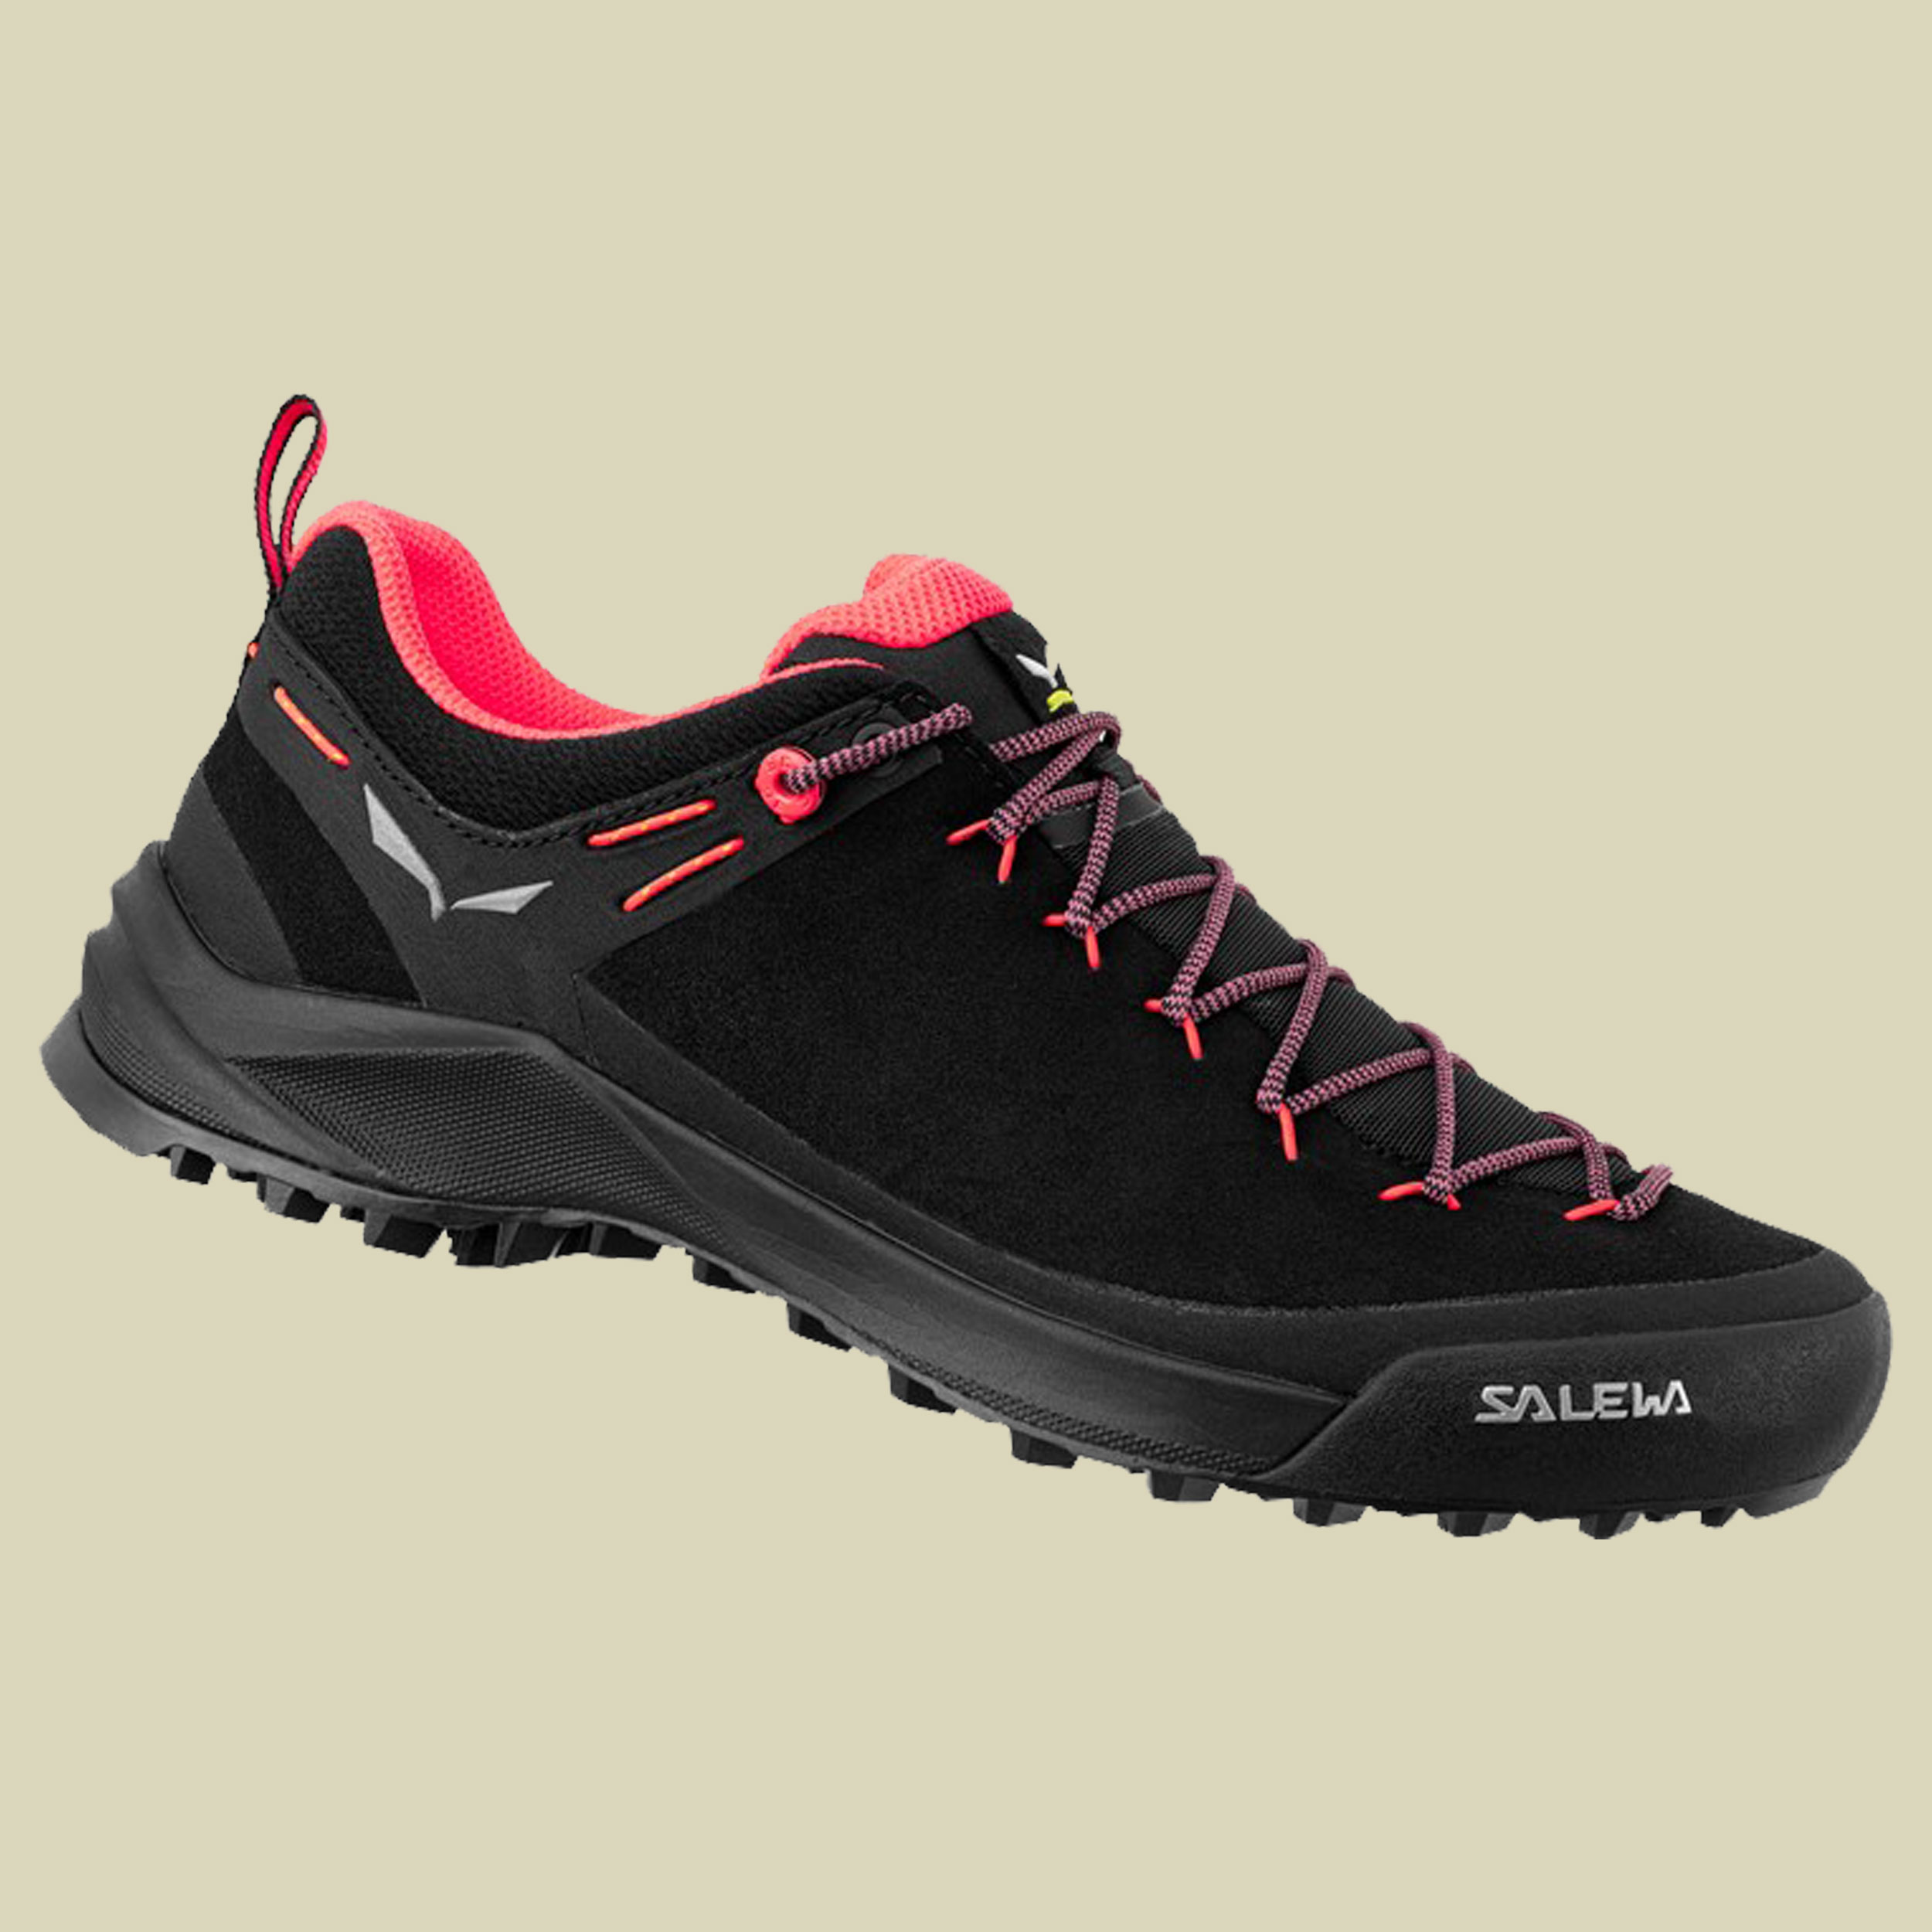 WS Wildfire Leather Größe UK 5 Farbe black/fluo coral